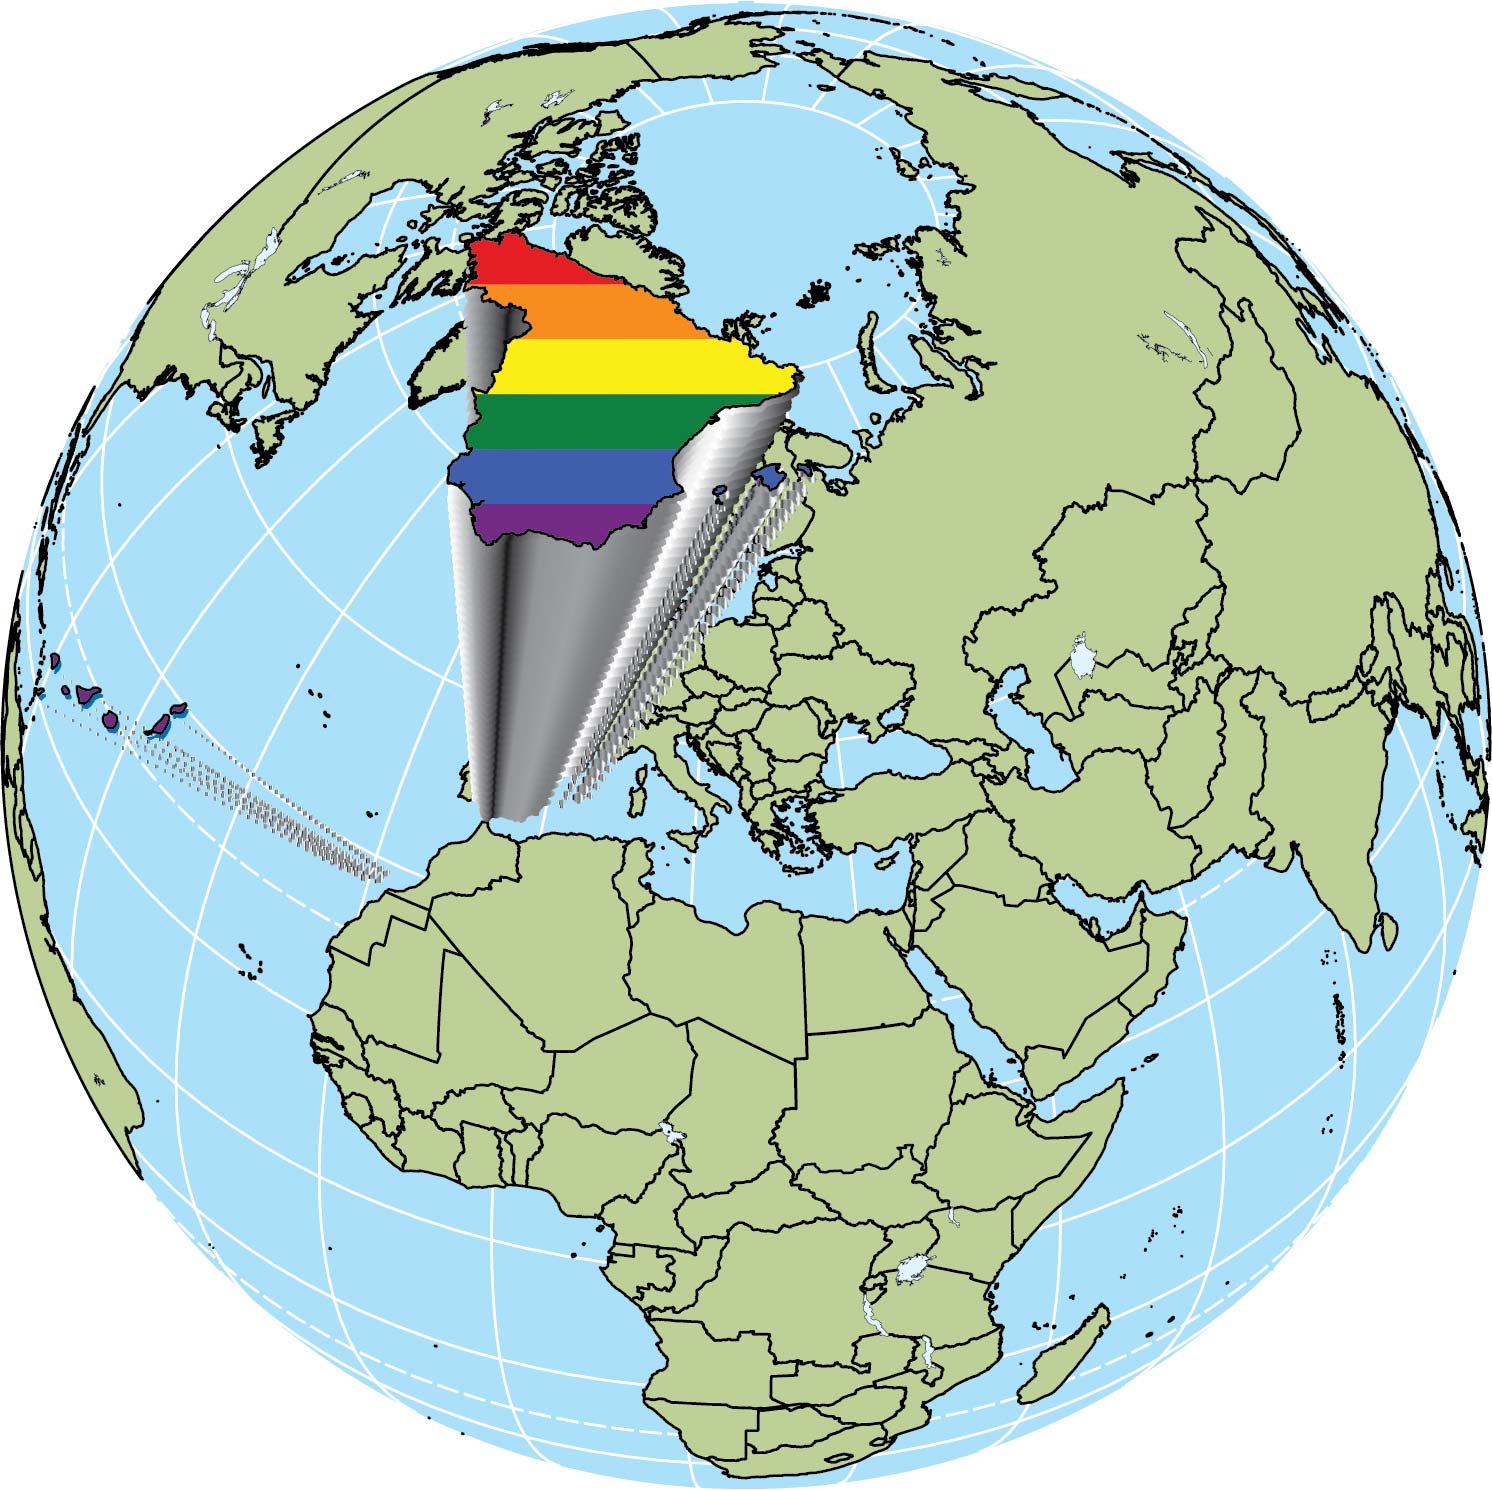 Although legal rights are consistent across Spain, attitudes toward LGBTQ+ individuals may vary based on geography.